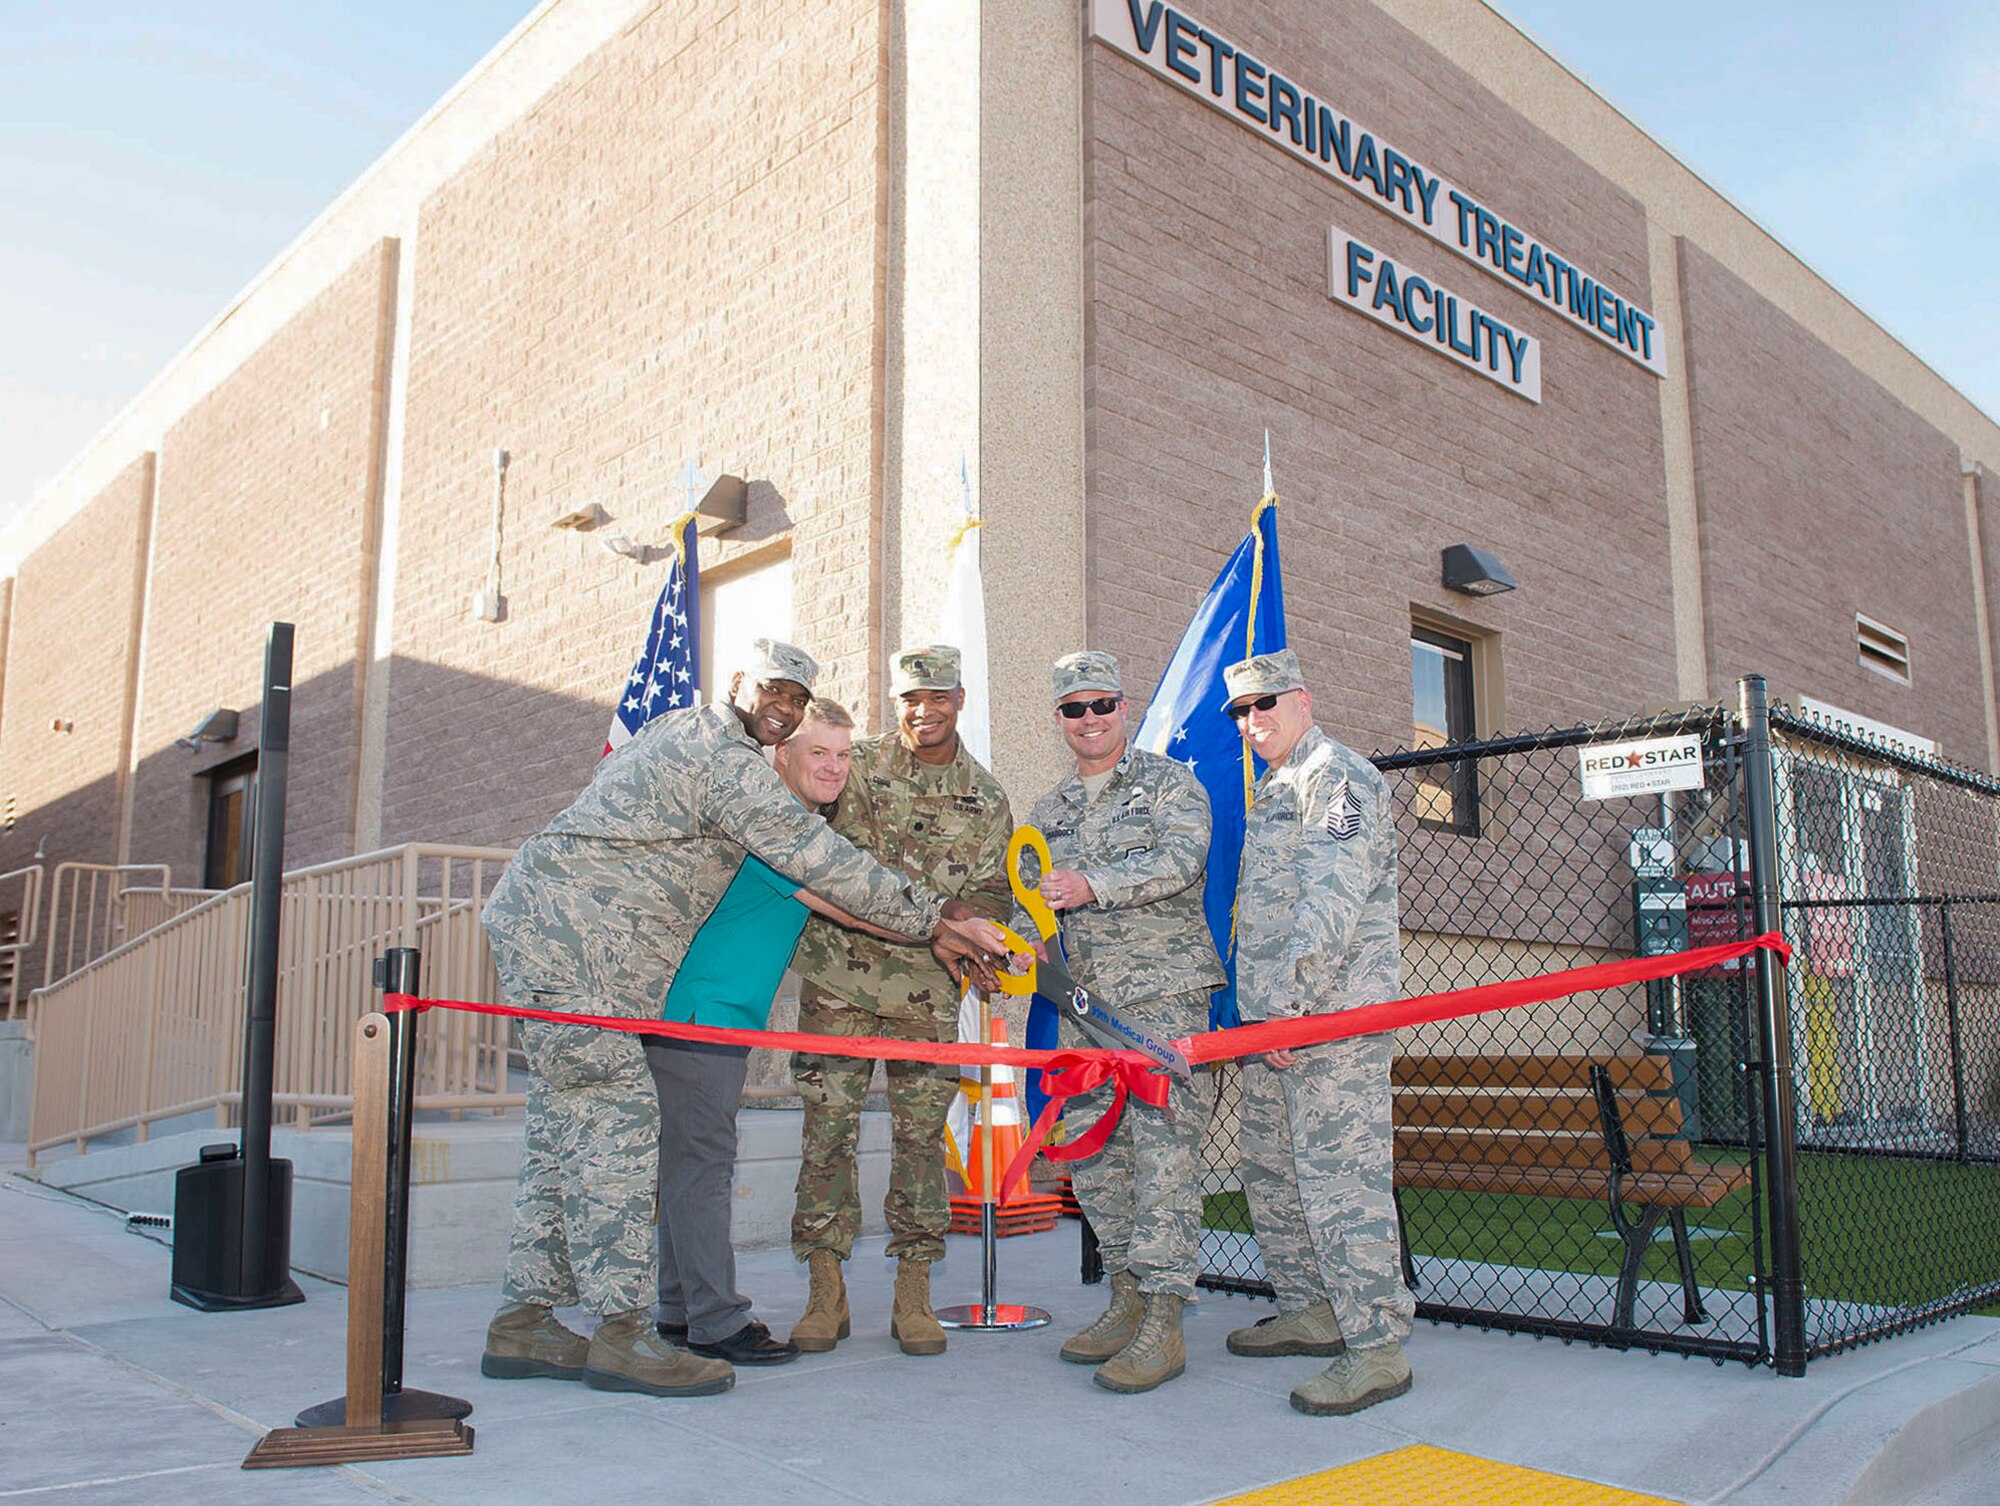 Base leadership, distinguished visitors and veterinary treatment facility staff cut the ribbon to signify the opening of the facility on Nellis Air Force Base, Nev., Nov. 14, 2018. The new facility is 3,600 square feet, which is twice the size of the previous facility. (U.S. Air Force photo by Airman 1st Class Bryan T. Guthrie)